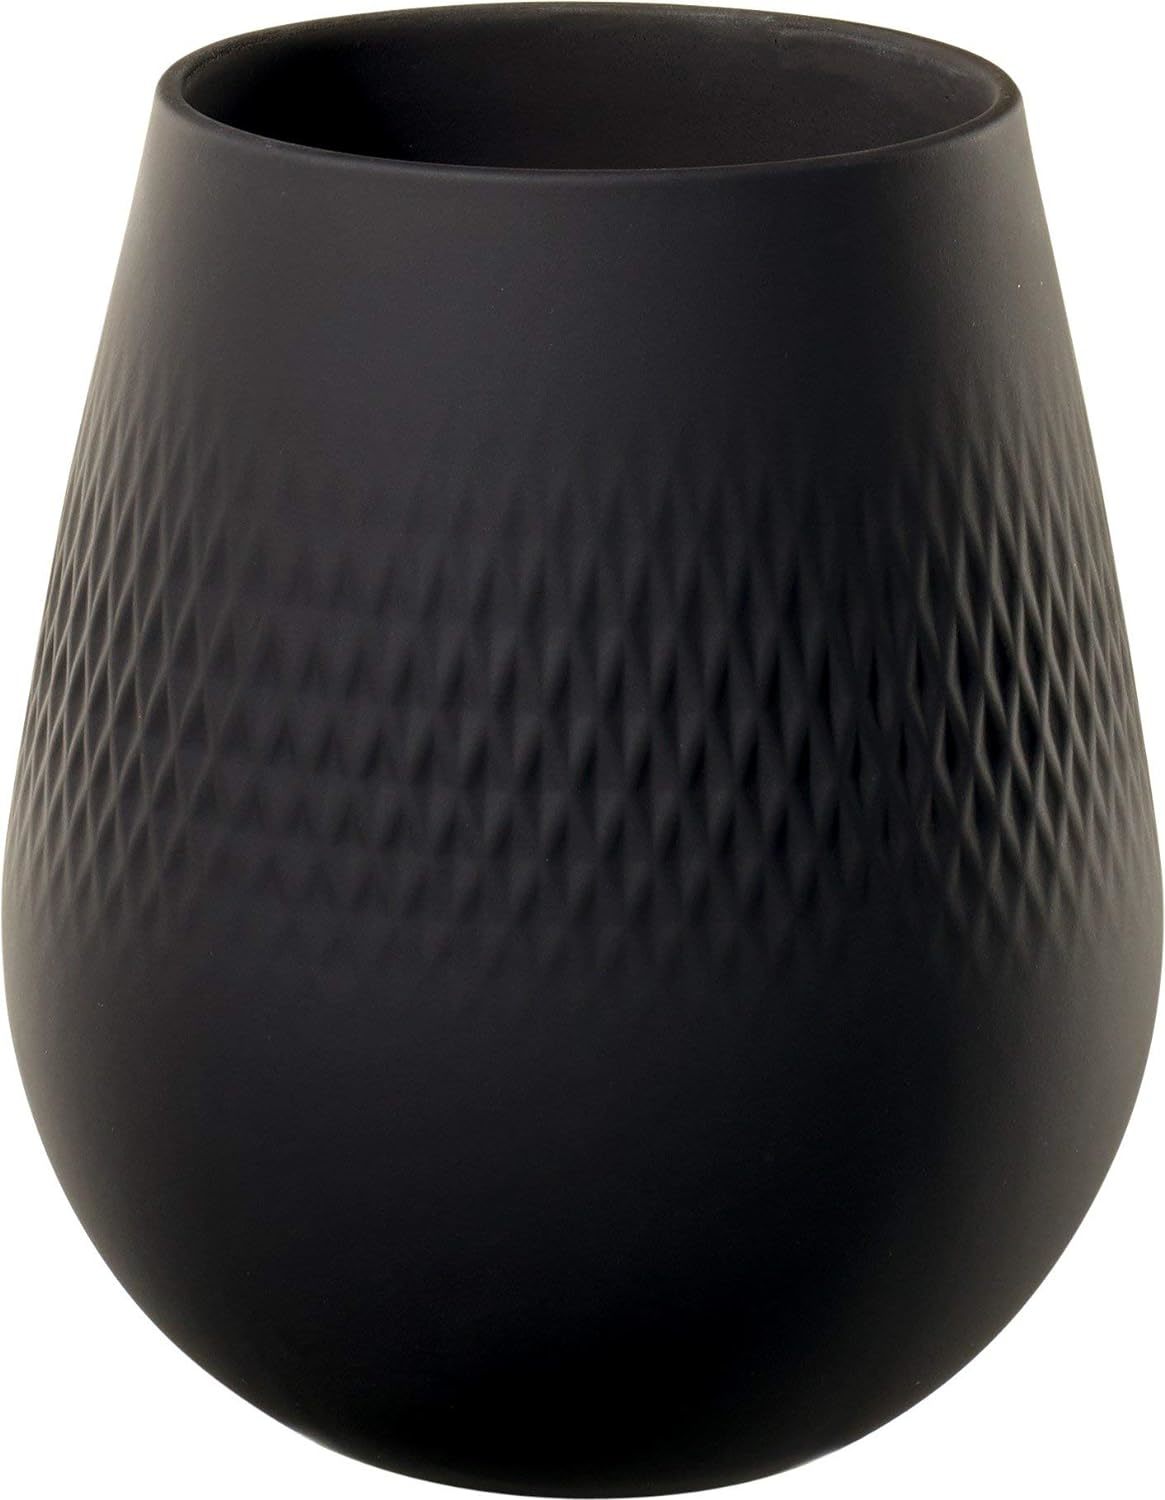 Primary image for Small Carre Collier Noir Vase By Villeroy & Boch, 5 In.